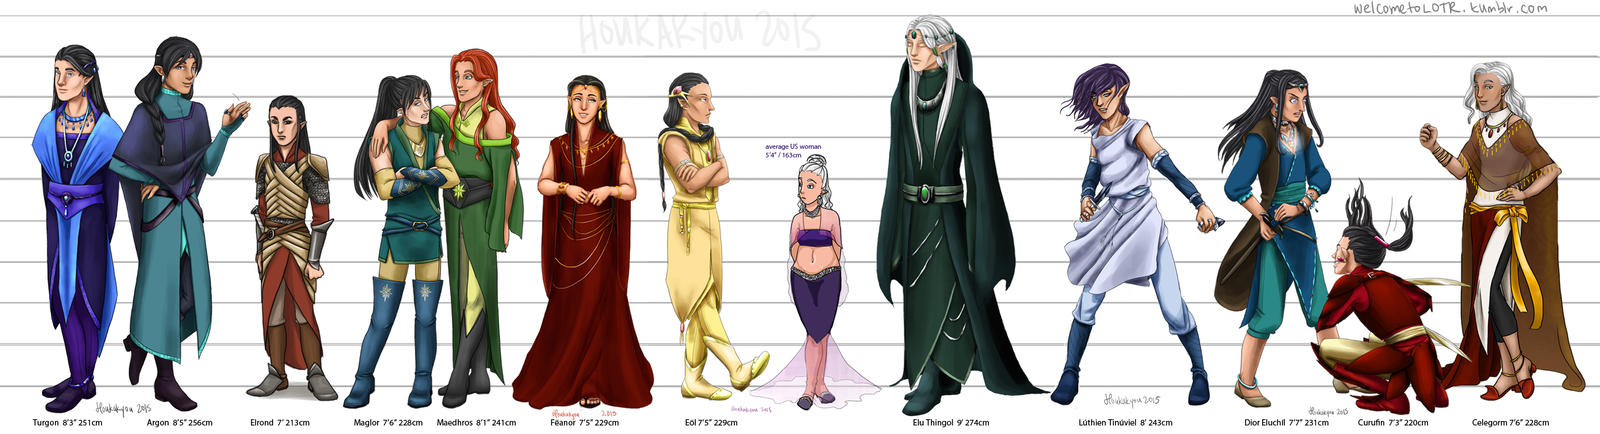 Lord Of The Rings Height Chart